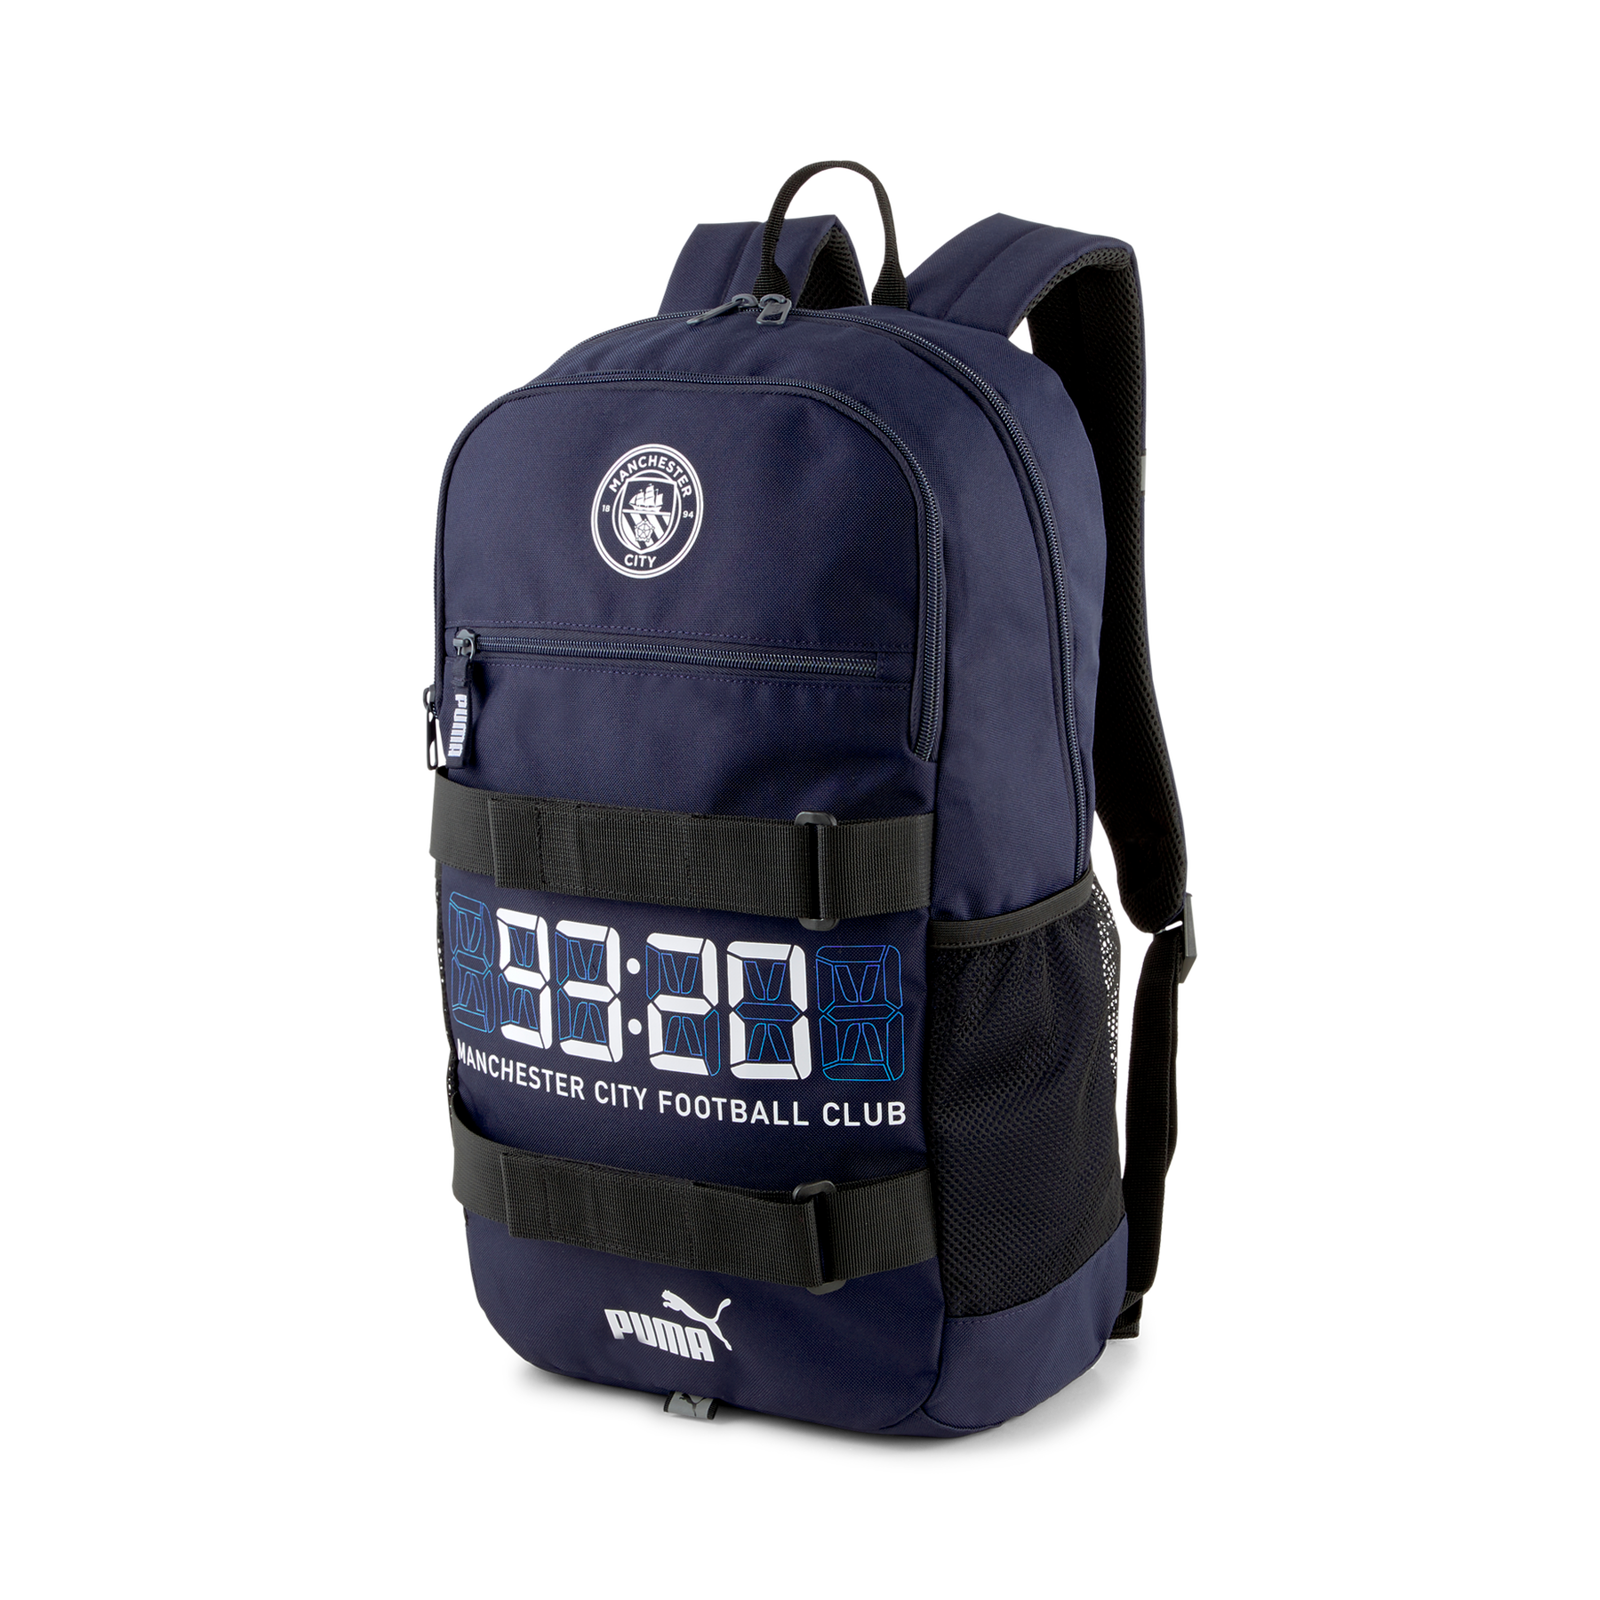 Police station Adelaide Plumber Manchester City Deck Backpack | Official Man City Store